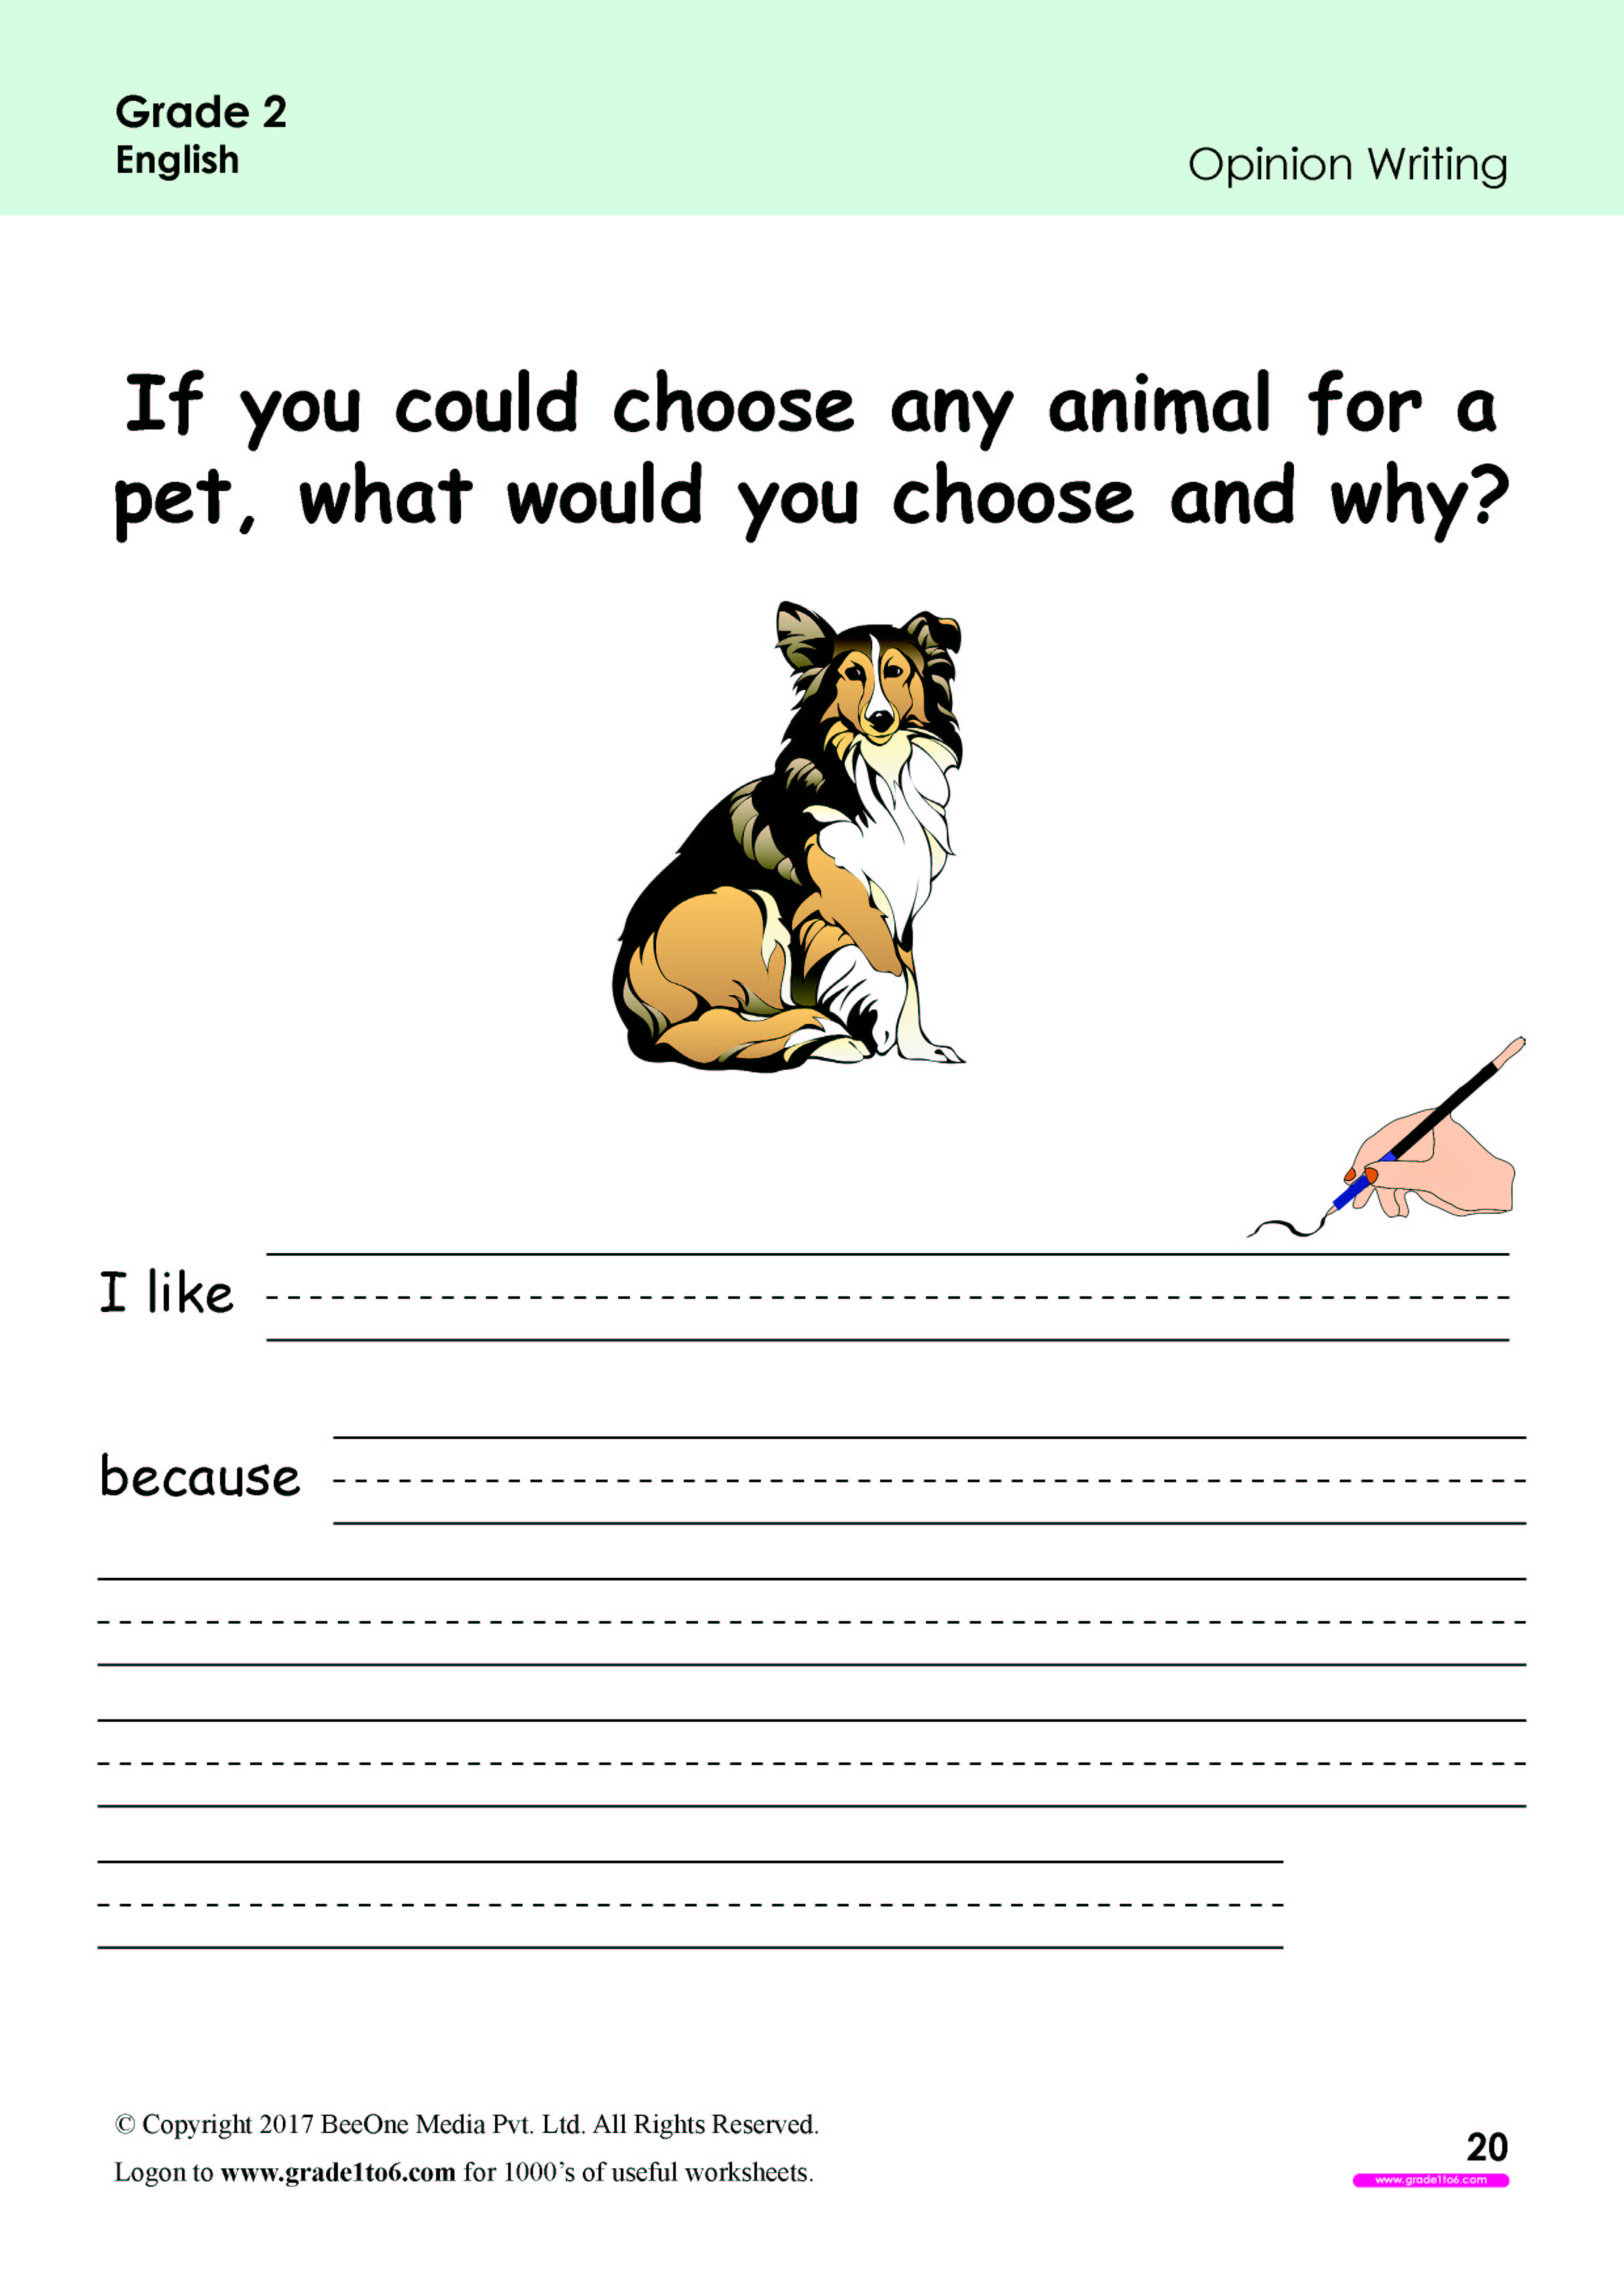 opinion-writing-worksheets-for-grade-2-www-grade1to6